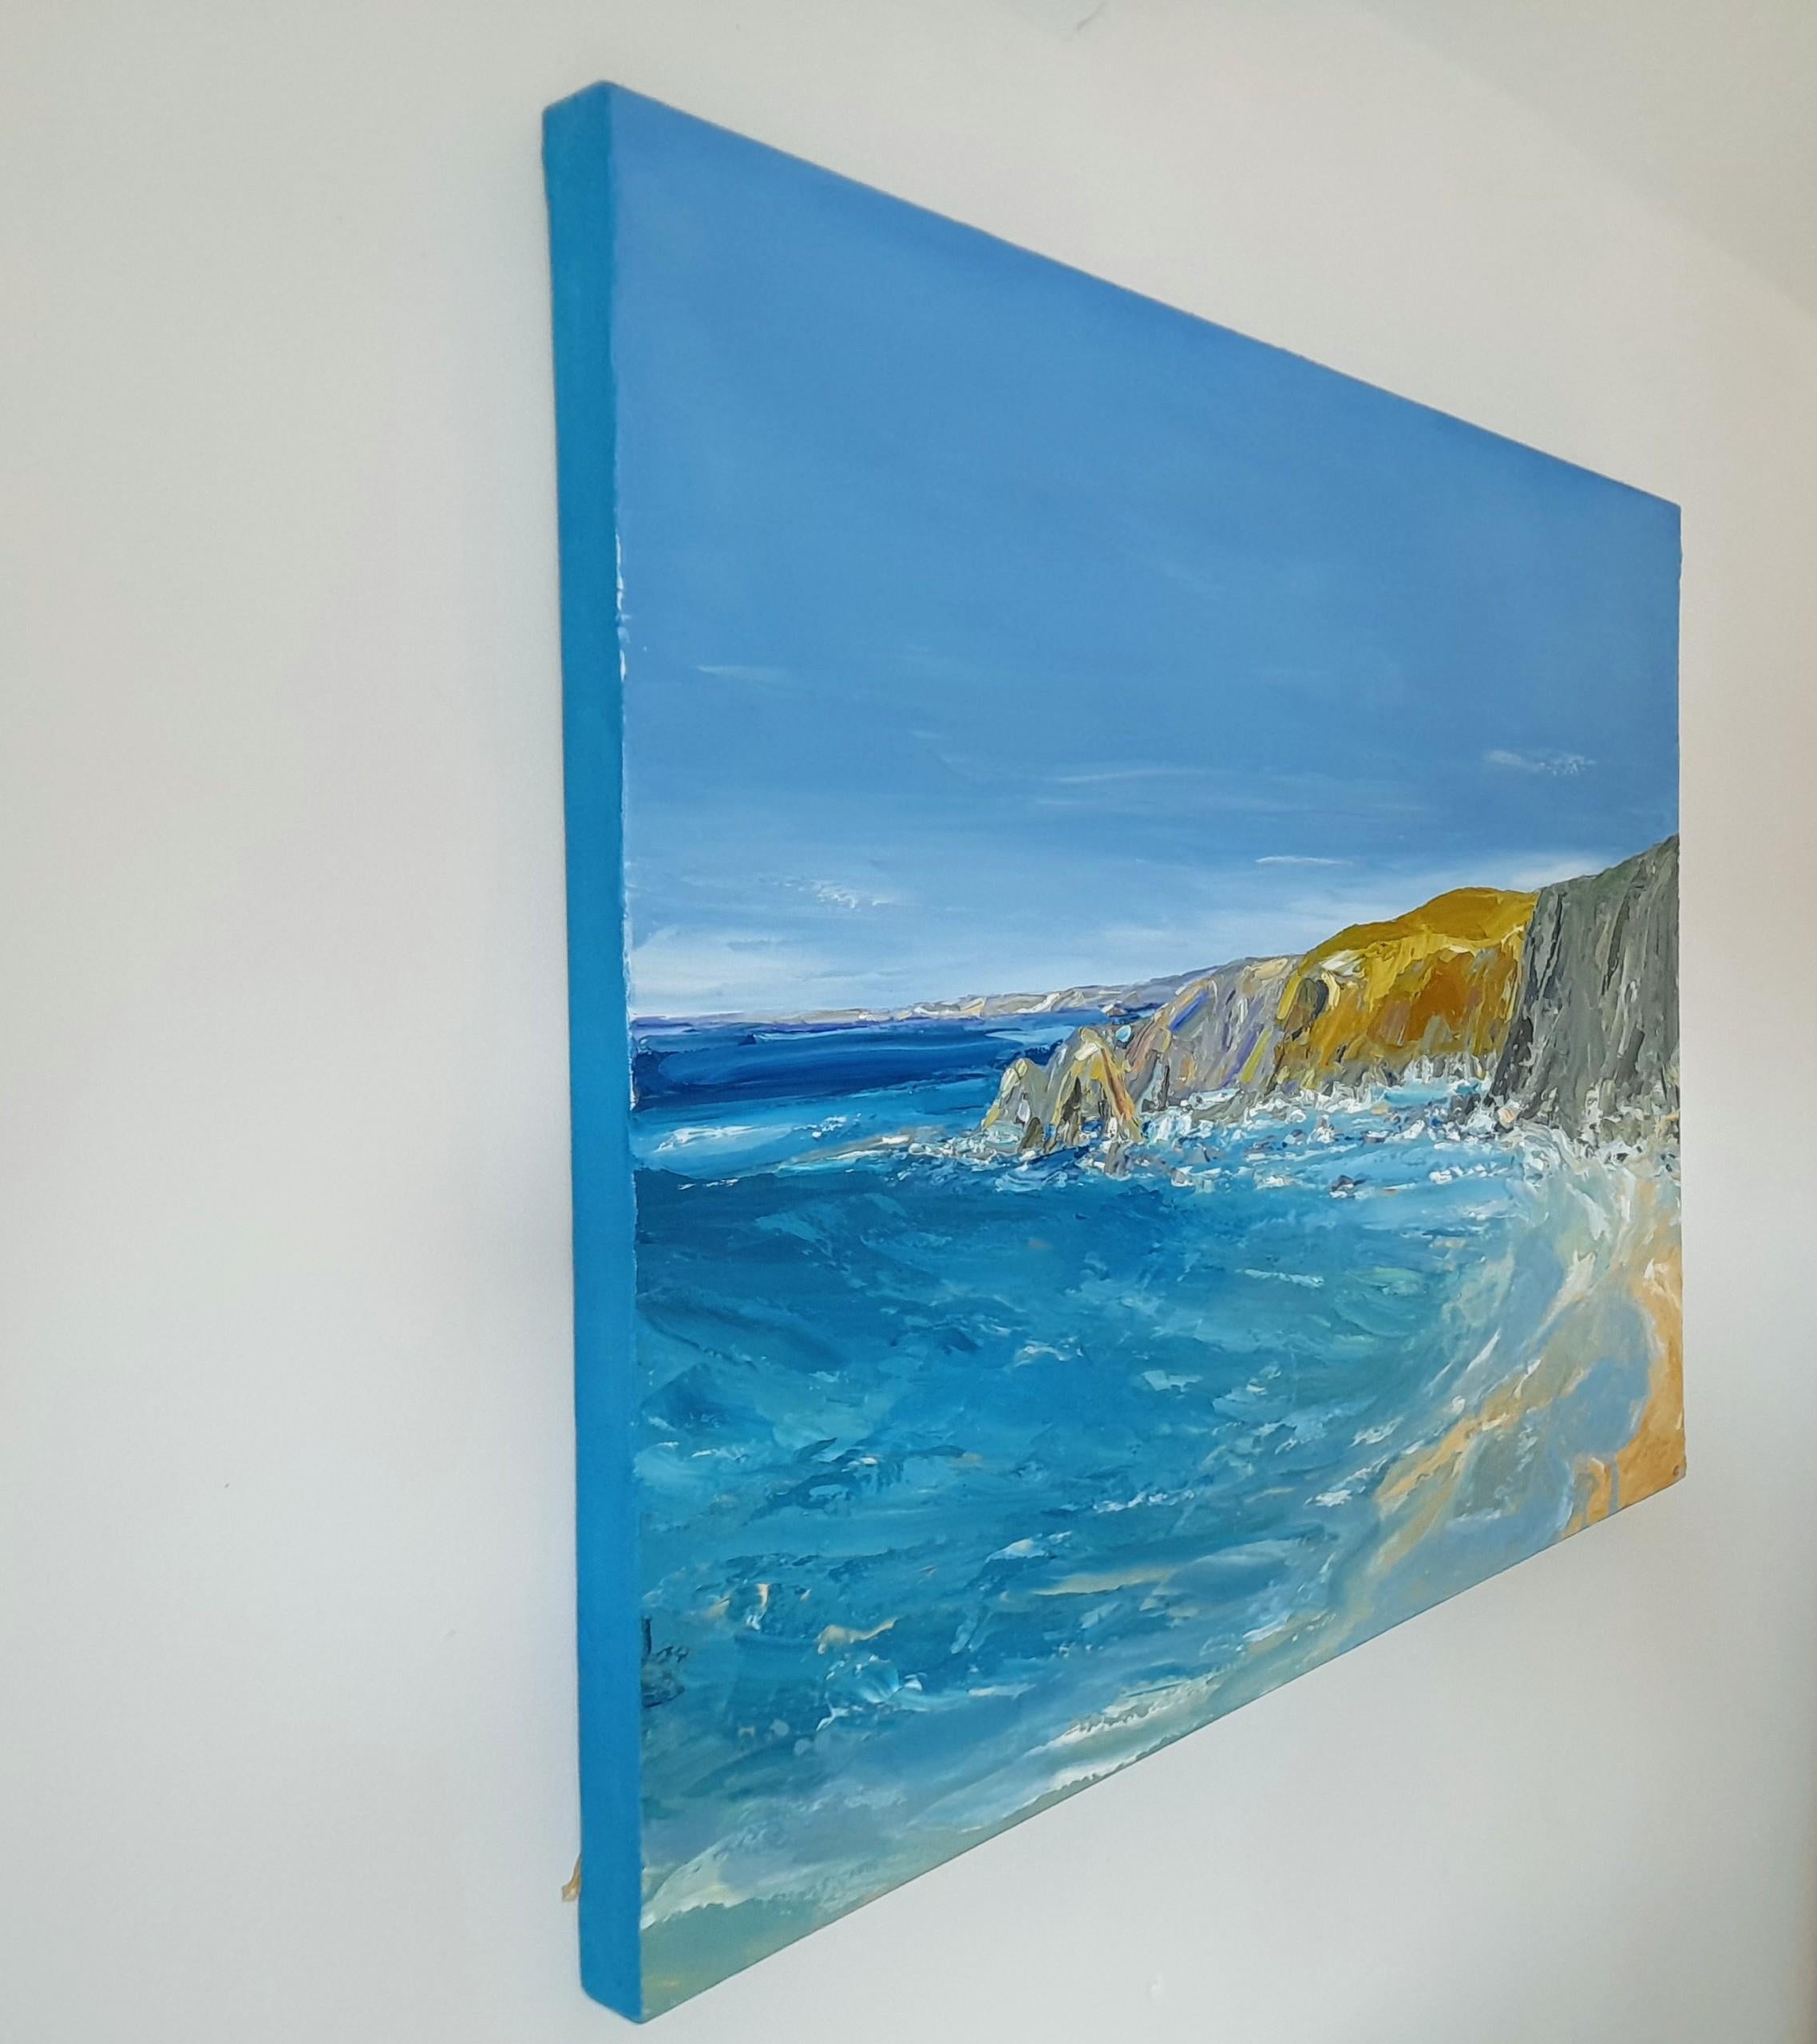 A colourful oil painting depicting a view at trevaunance cove in North Cornwall on a bright summers day. The paint is applied thickly with a palette knife giving life to the sea and lots of texture to the cliffs. The edges are painted with a